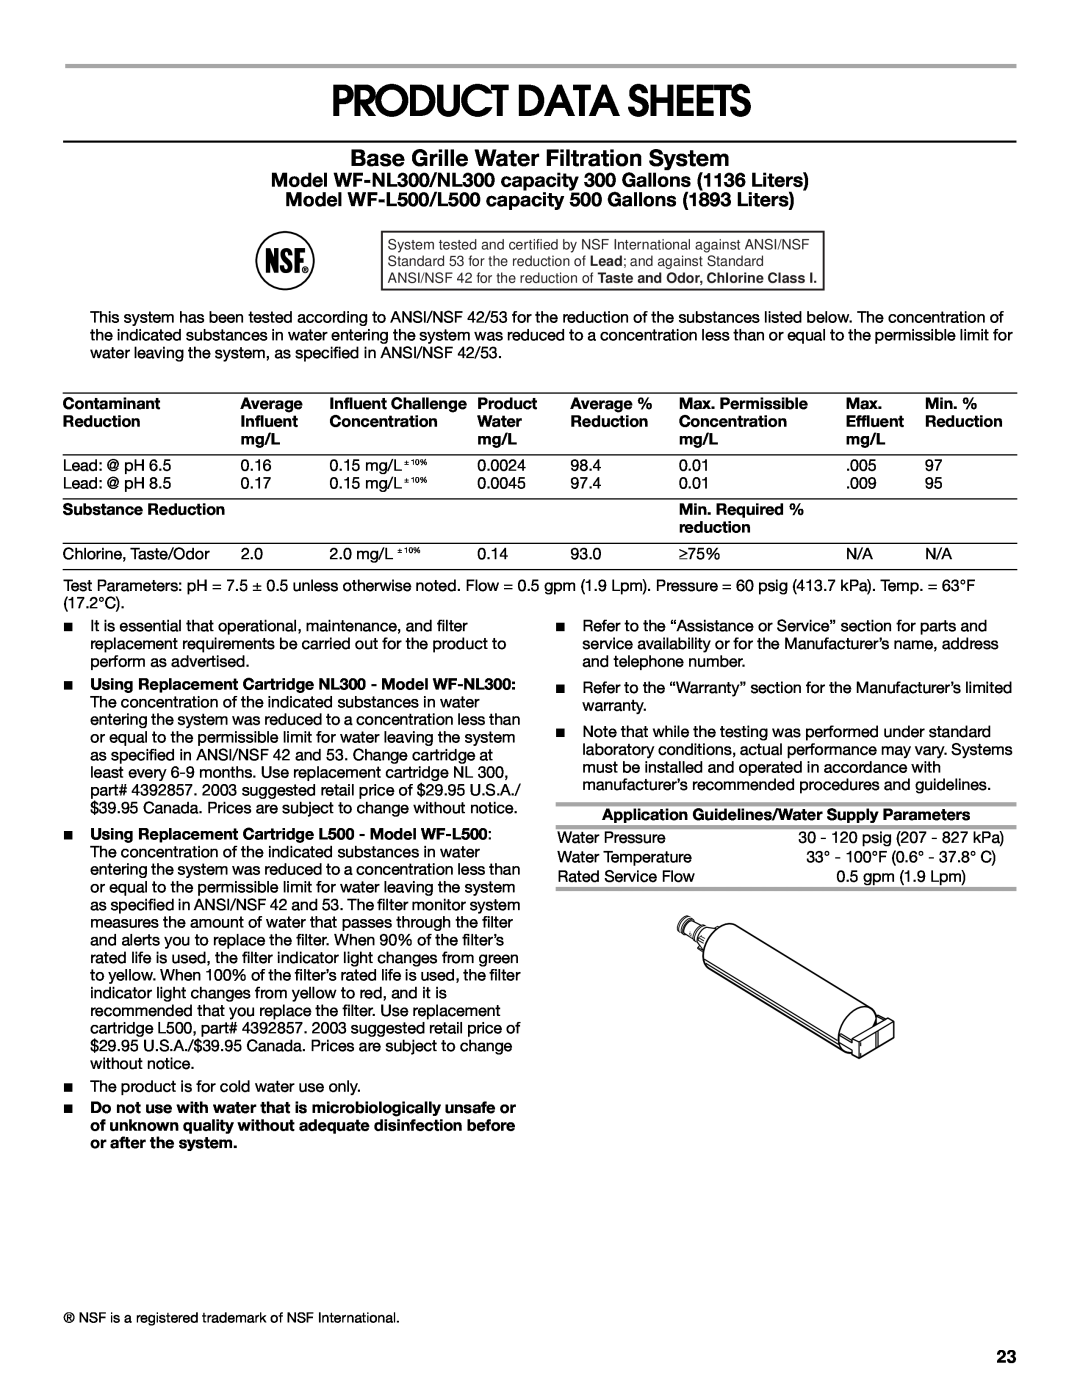 Whirlpool 2188766 manual Product Data Sheets, Base Grille Water Filtration System 